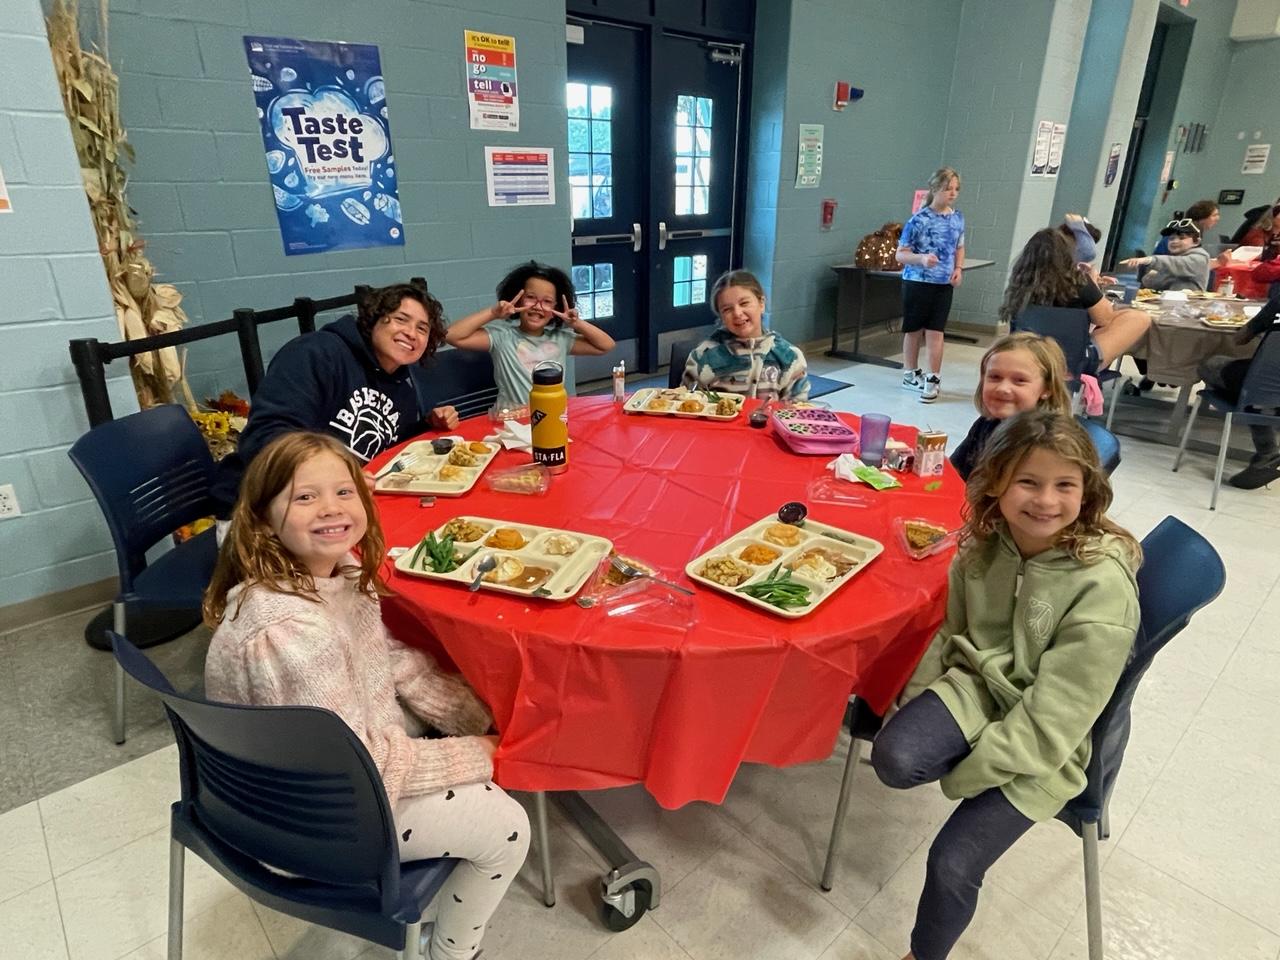 The five elementary students sat around the cafeteria table and smiling towards the camera. A staff sat with them as well, smiling to the camera. They all have delicious lunch trays front of them.